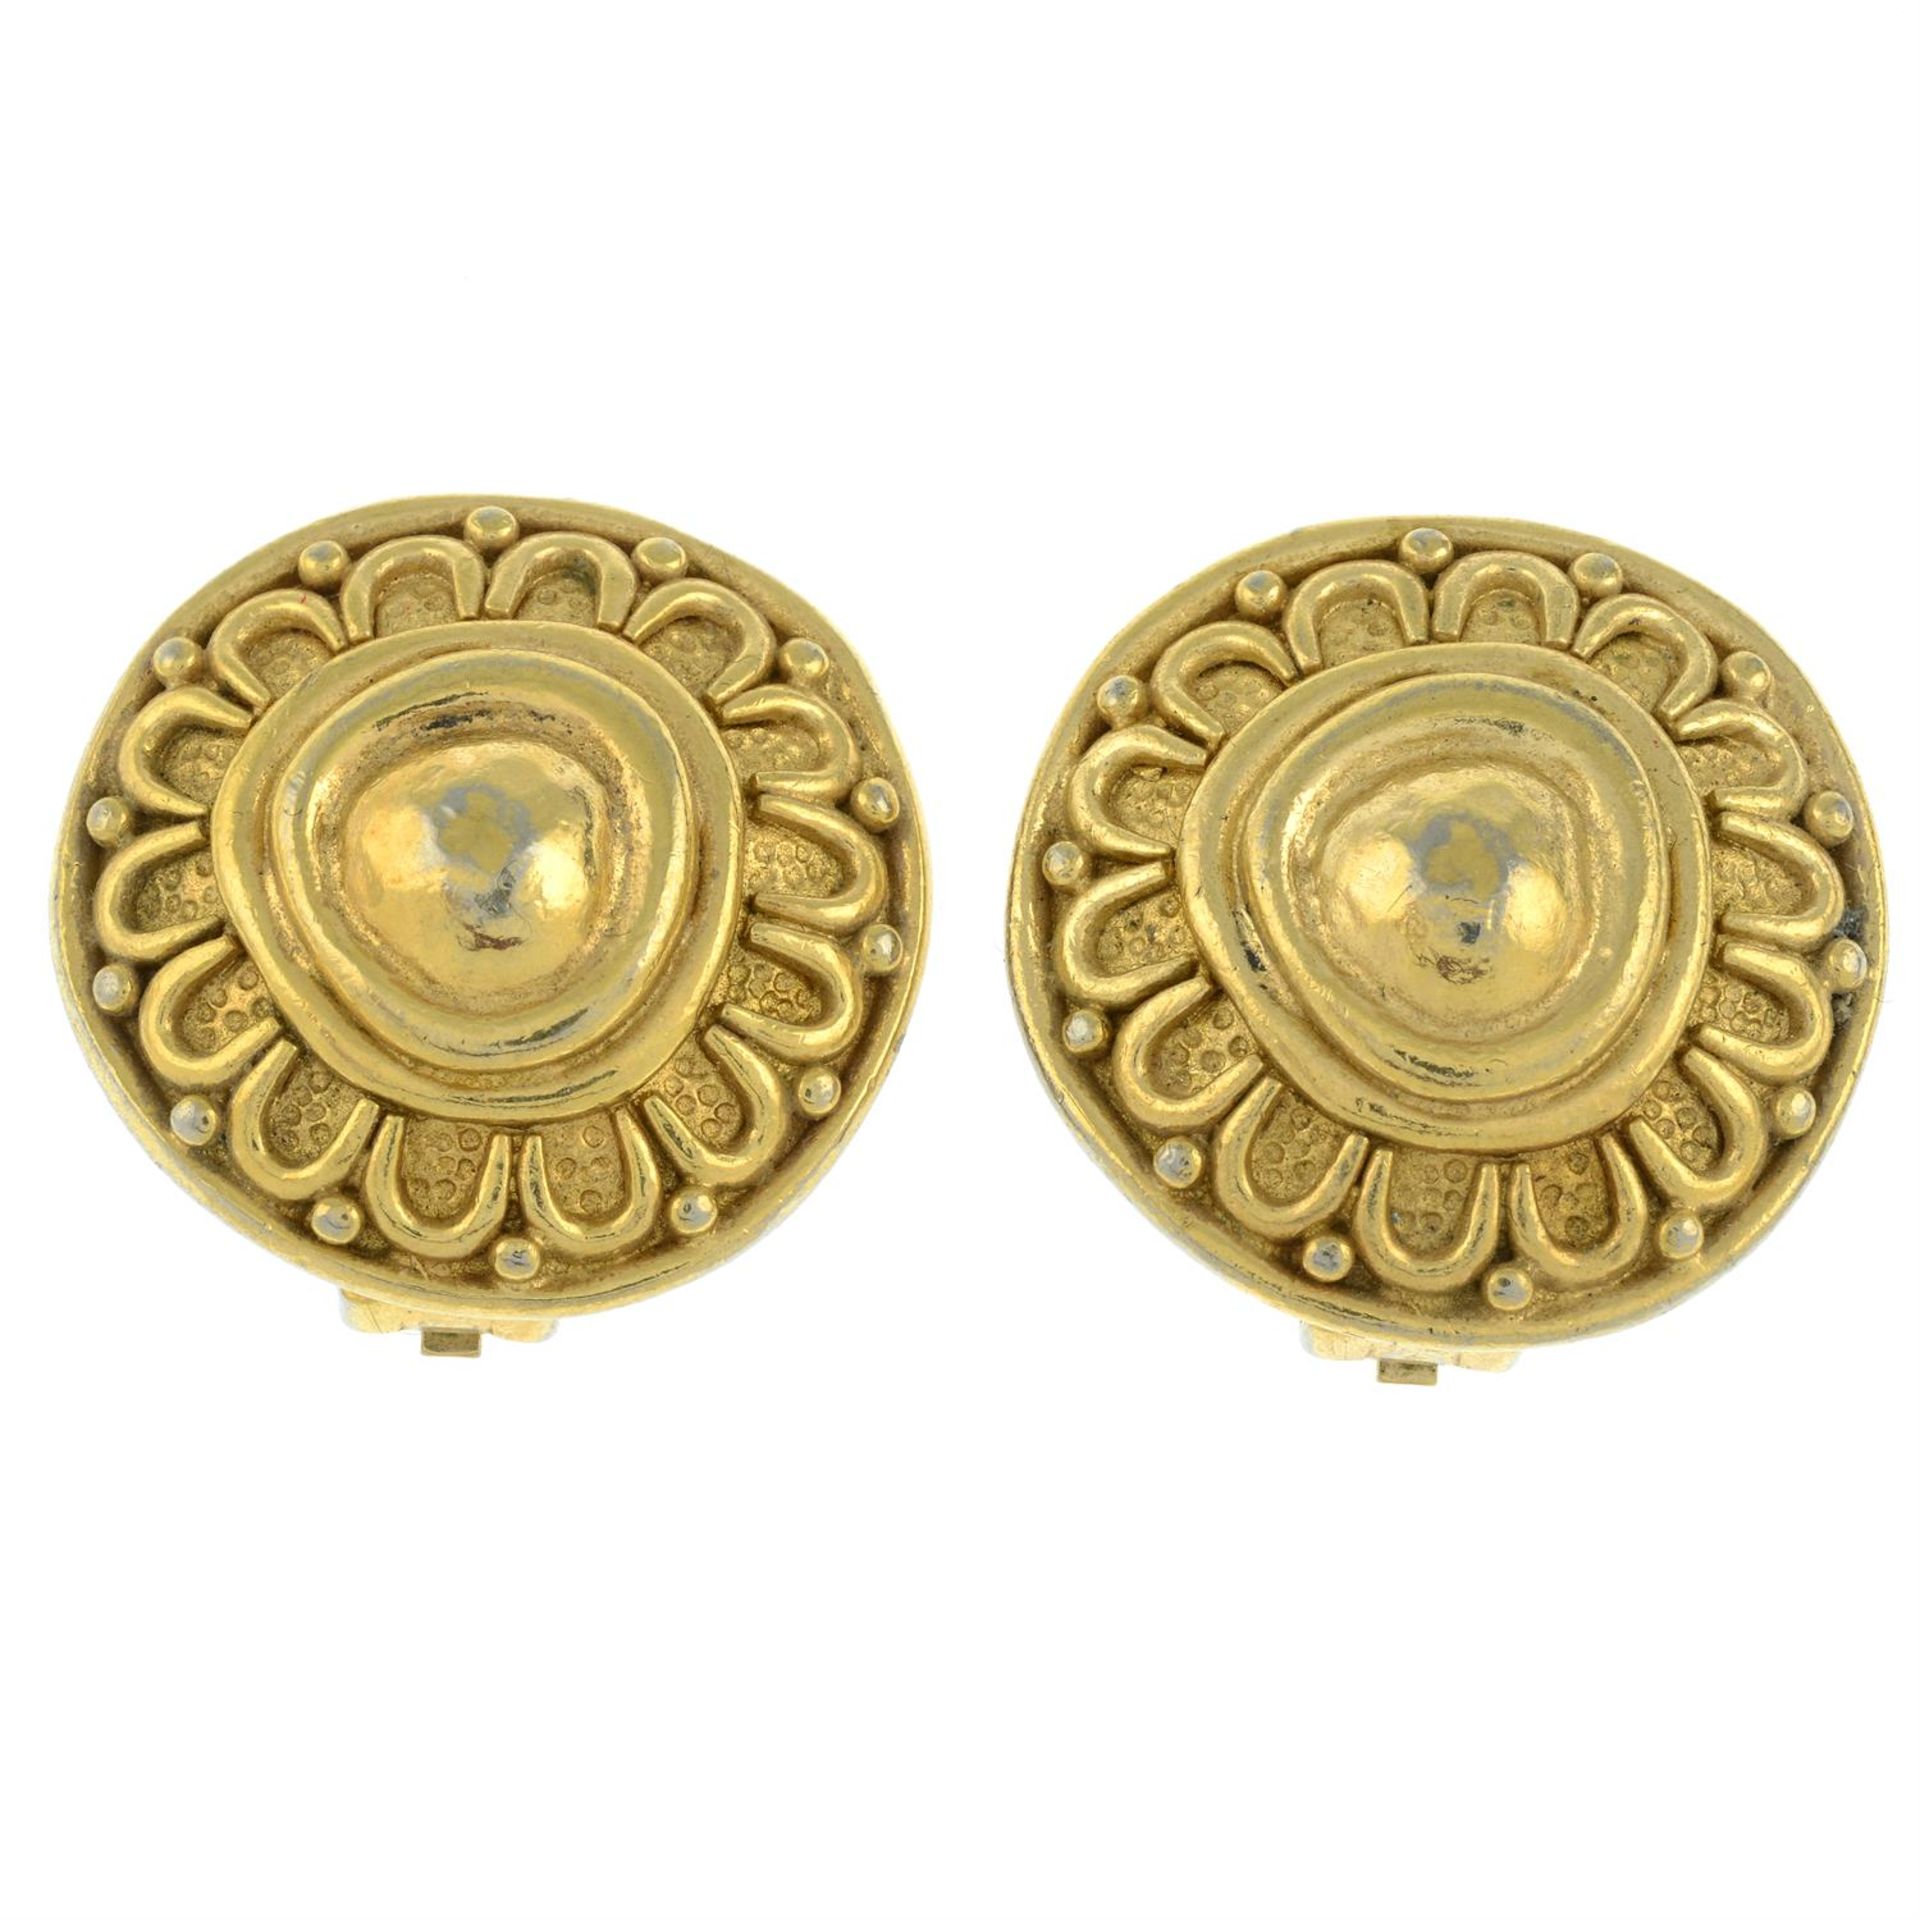 A pair of clip-on earrings, by Christian Dior.